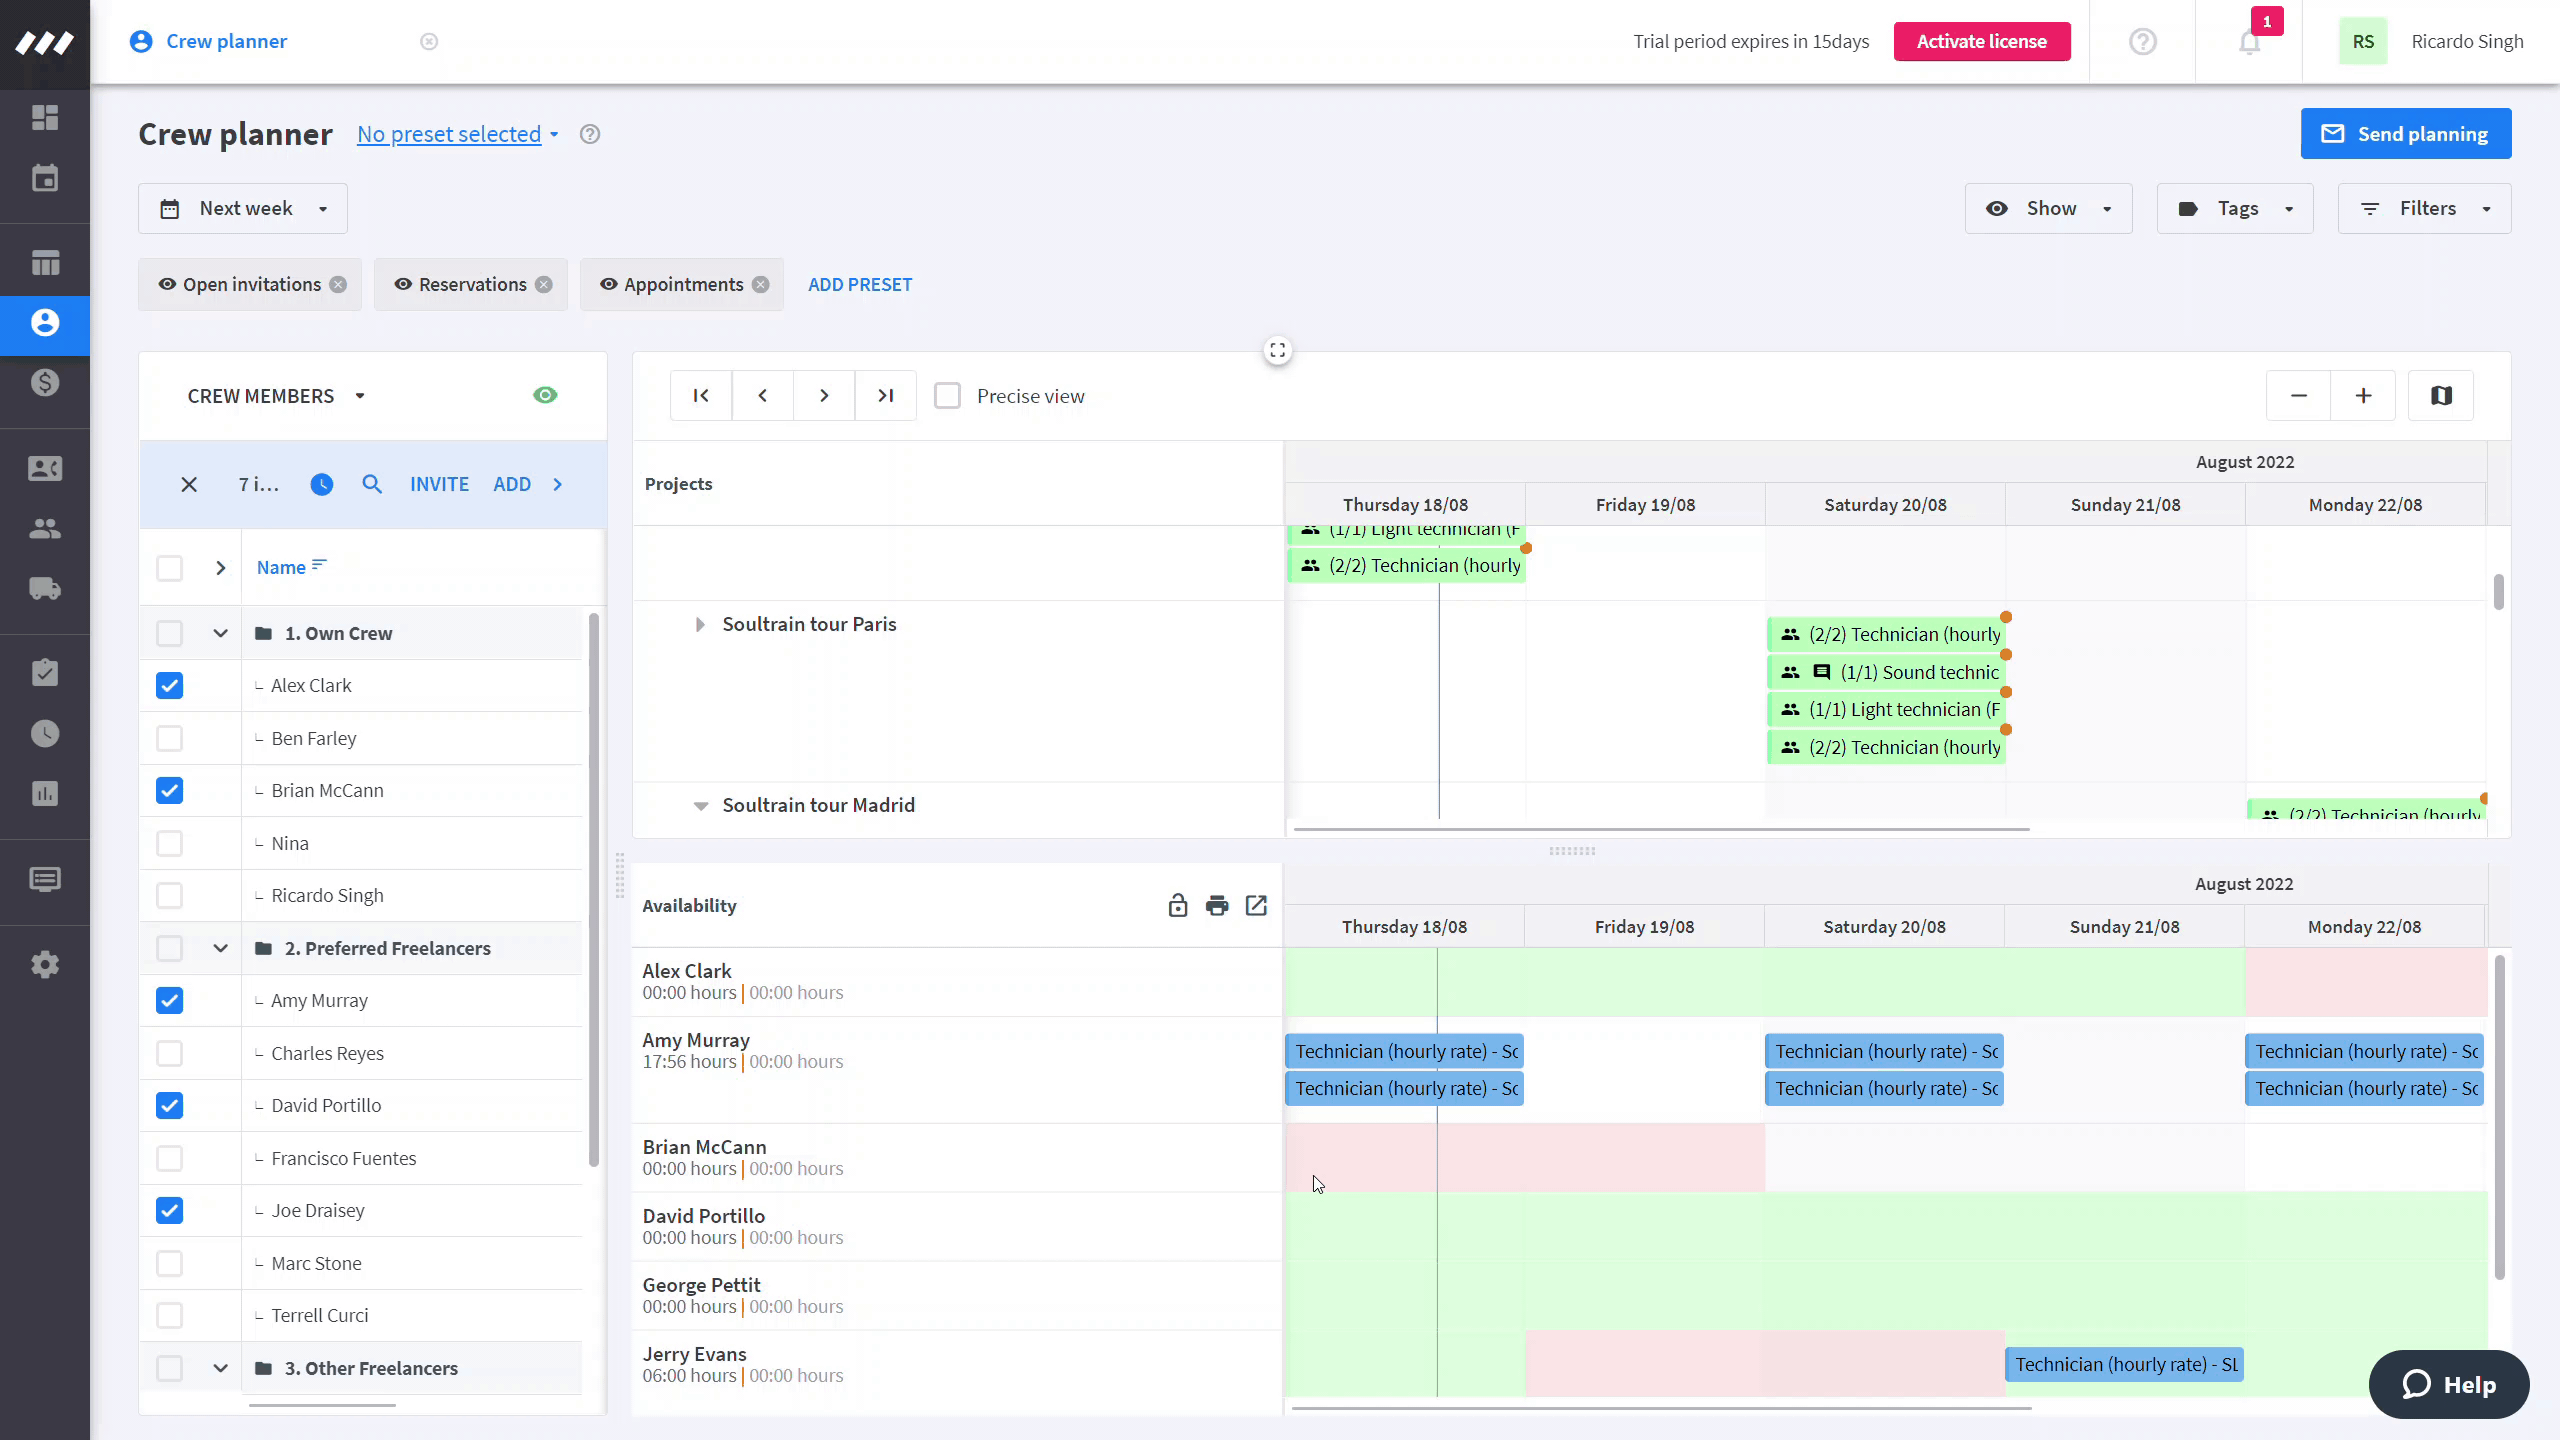 Editing functions in the crew planner